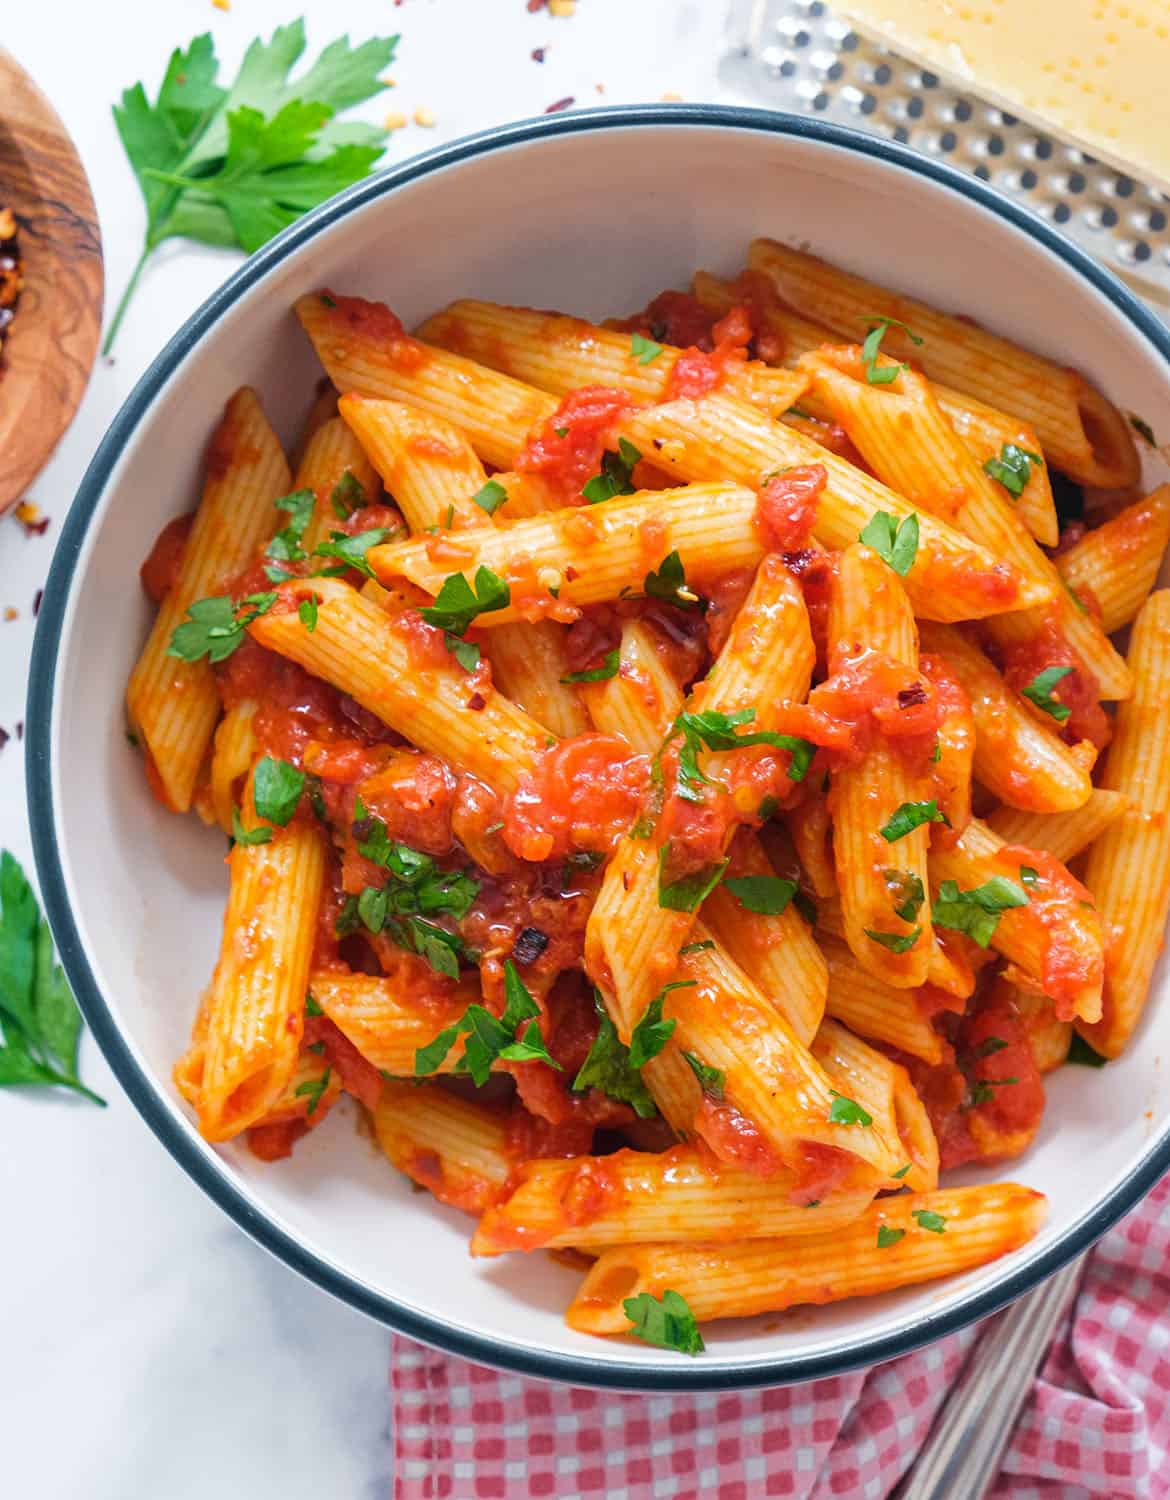 Penne - Rigate  Share the Pasta